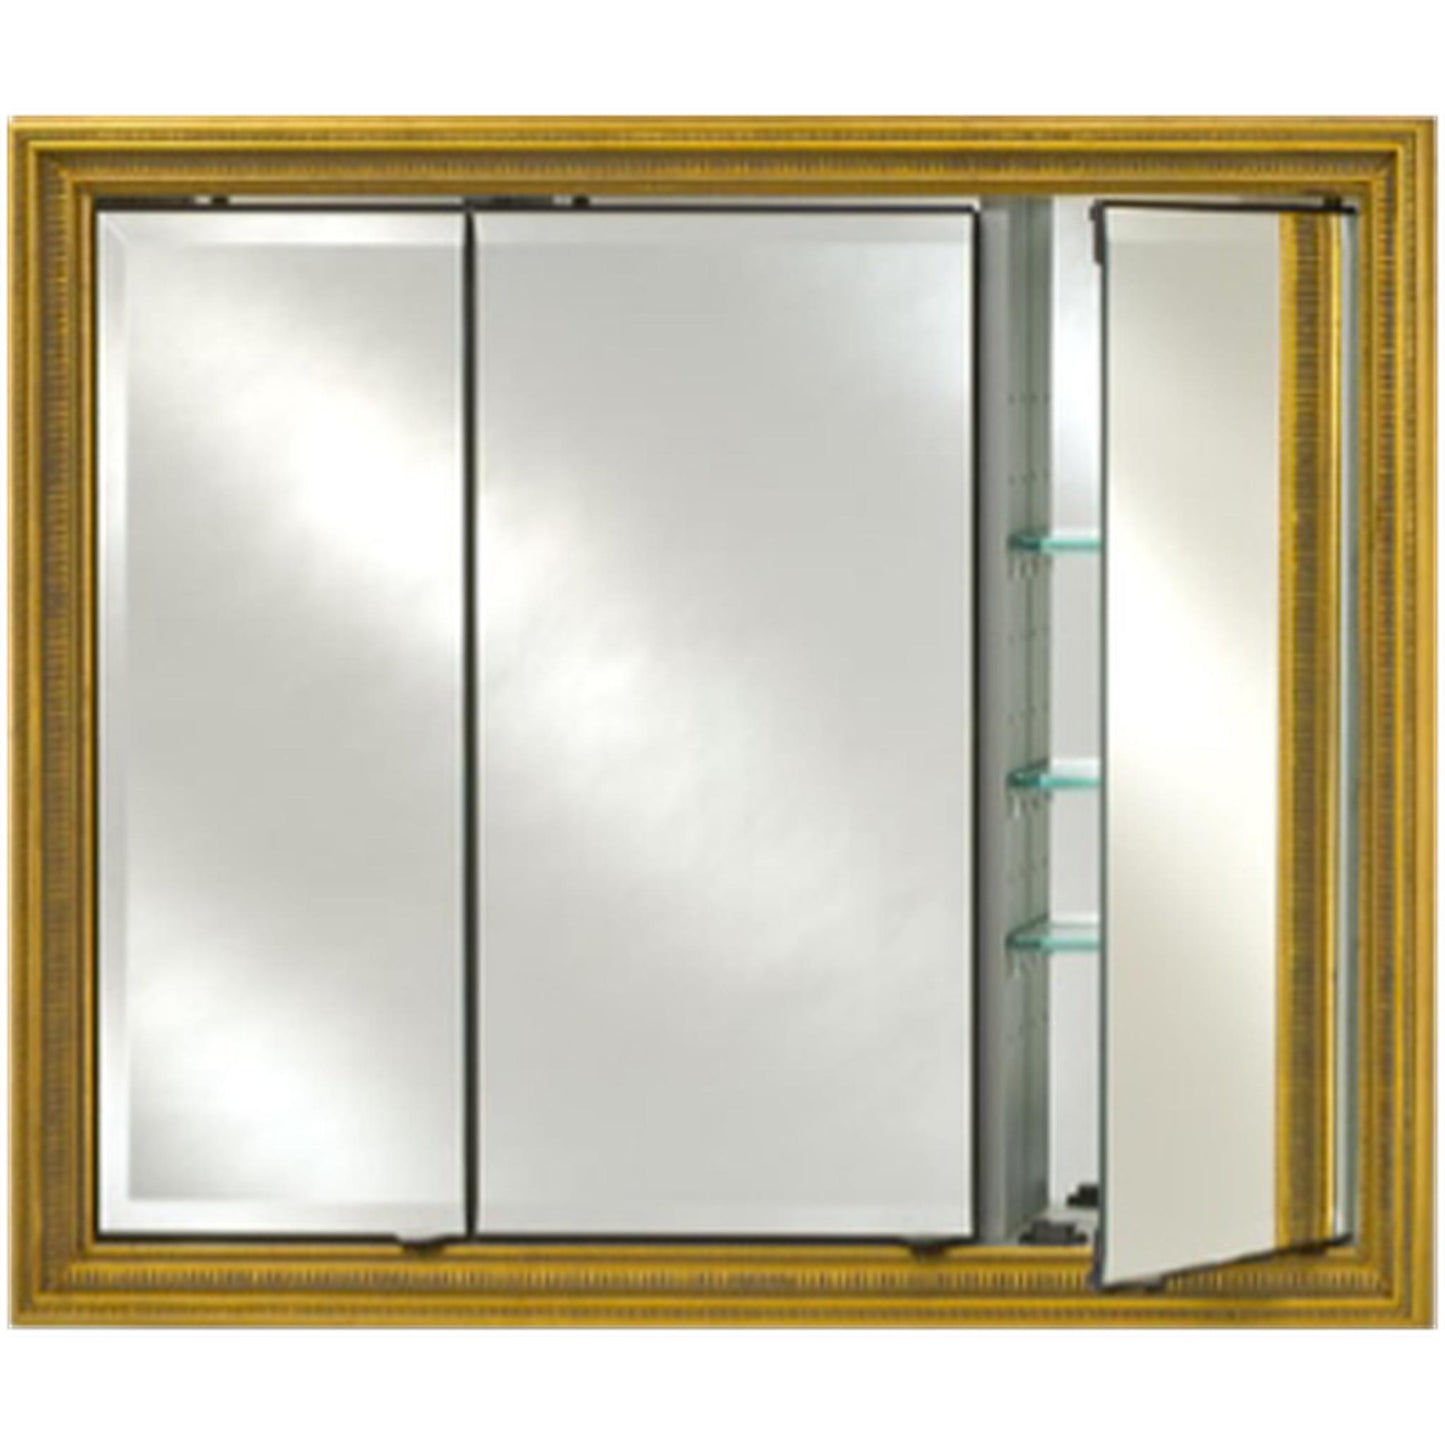 Afina Signature 47" x 36" Polished Glimmer-Flat Recessed Triple Door Medicine Cabinet With Beveled Edge Mirror